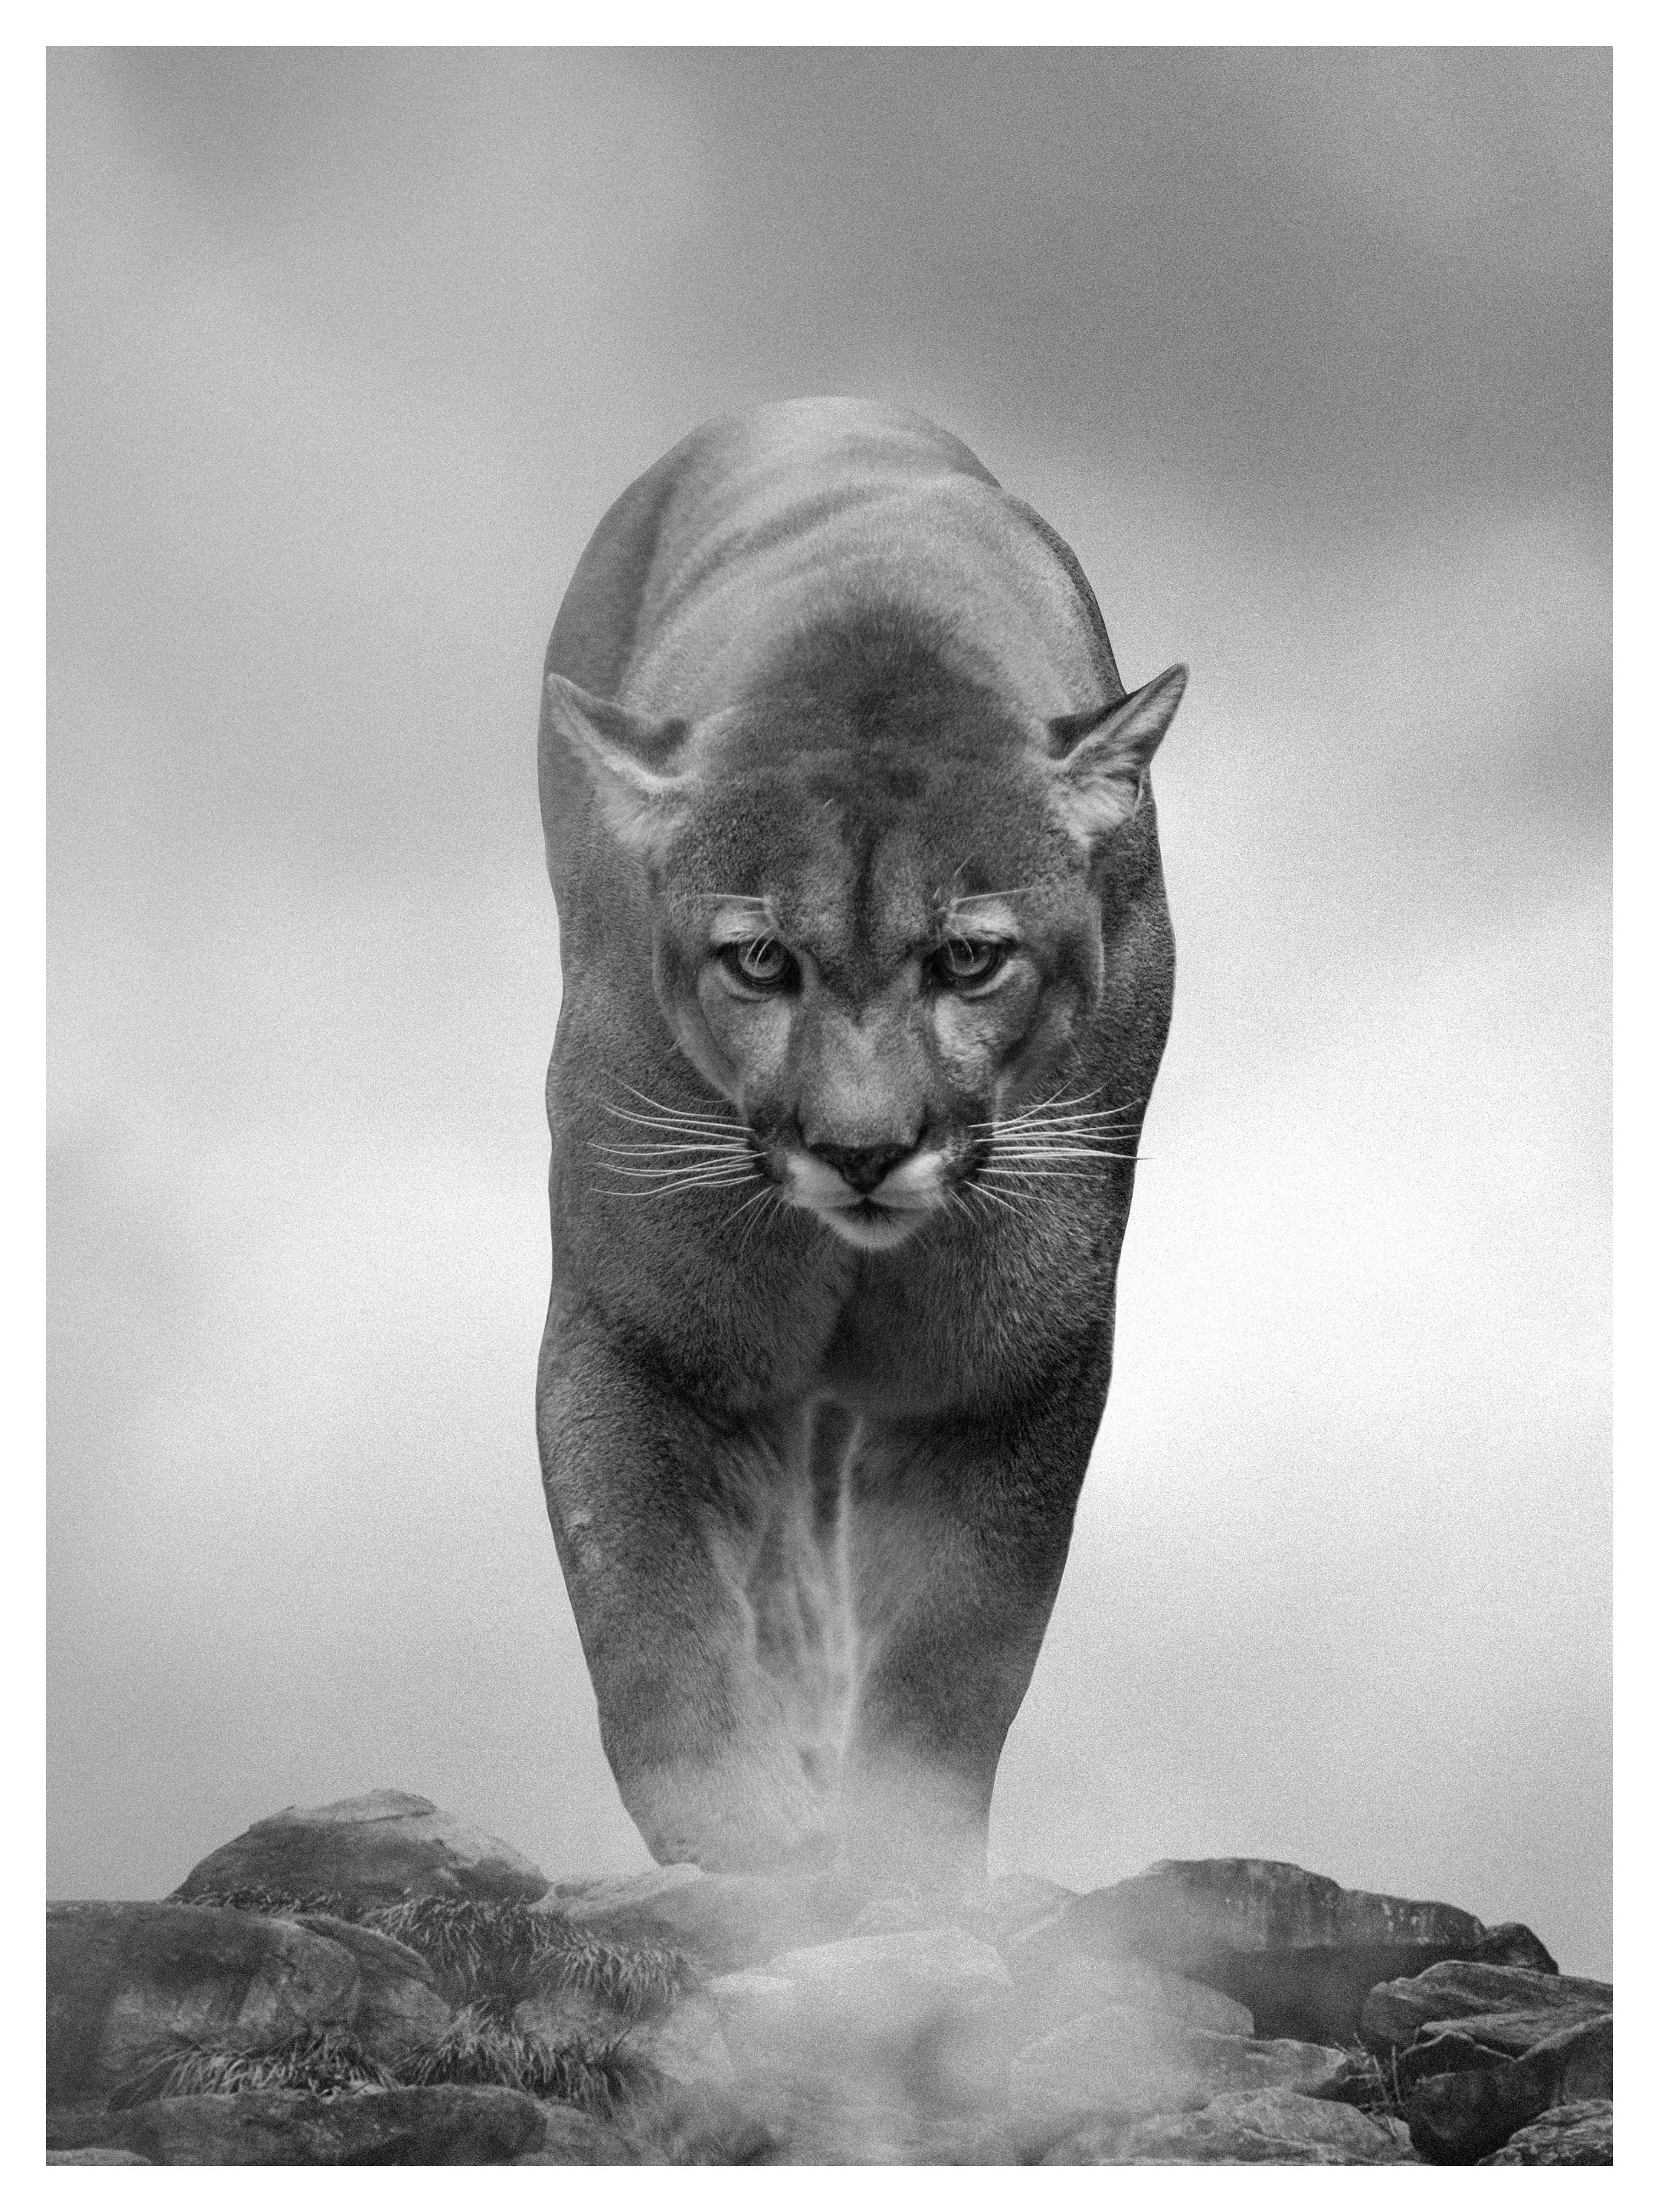 Shane Russeck Black and White Photograph - King of the Mountain 40x60 Black & White Photography, Cougar, Mountain Lion Art